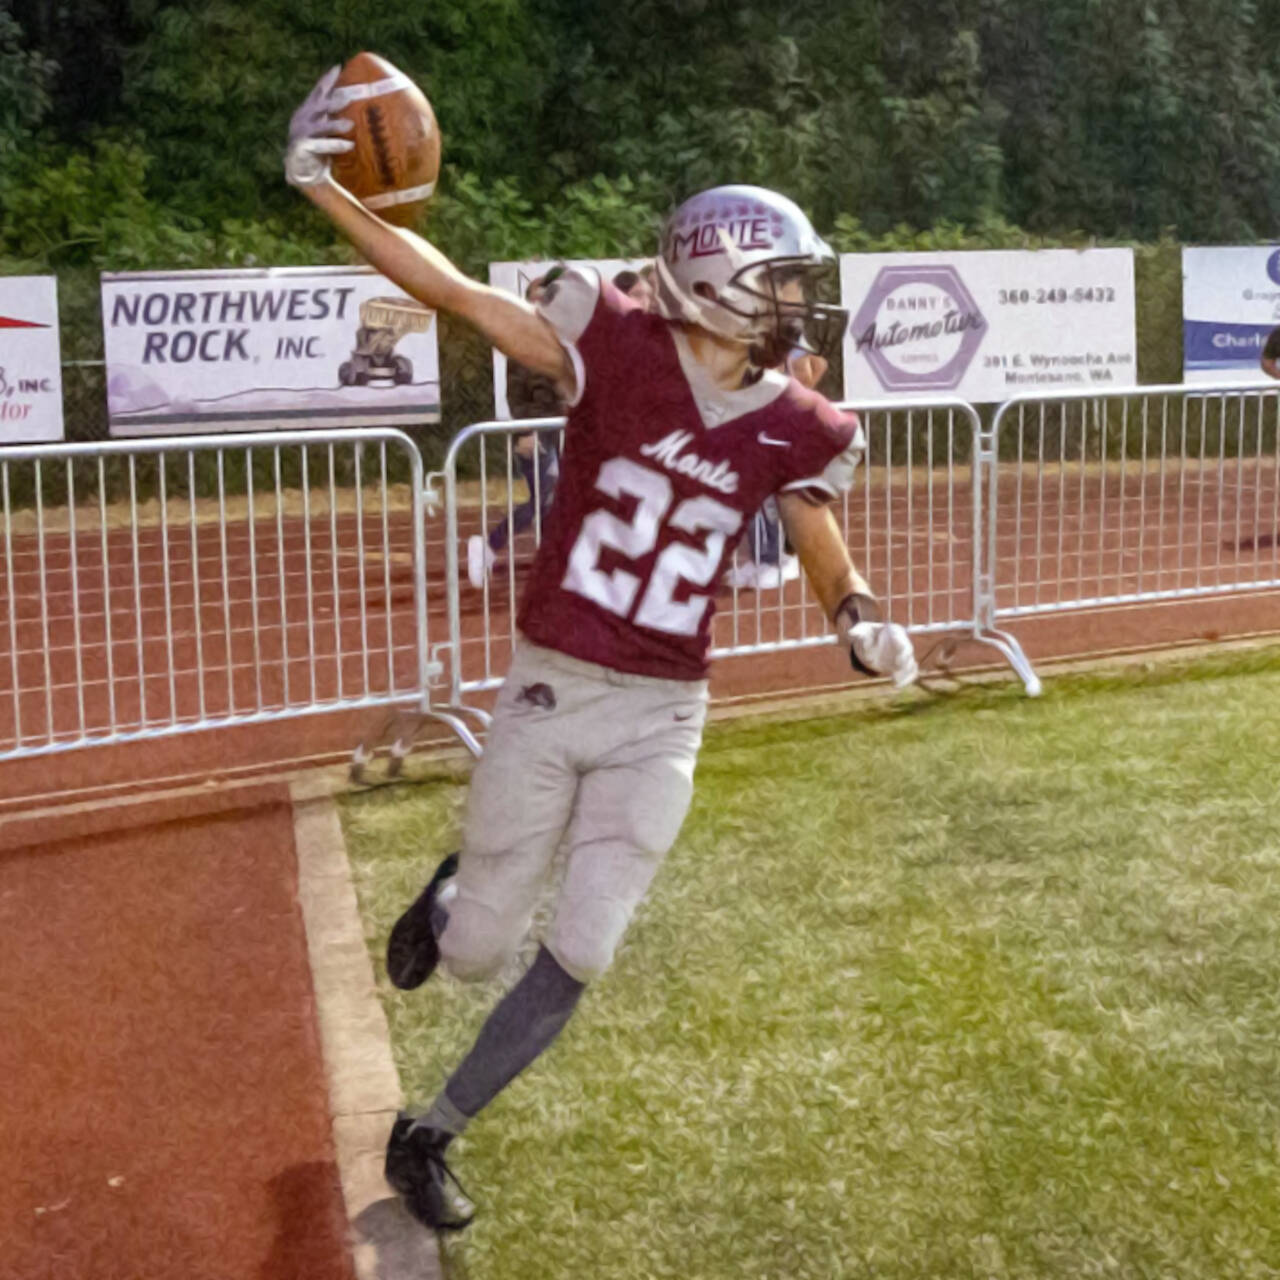 PHOTO BY SHAWN DONNELLY Montesano receiver Bode Poler and the Bulldogs will face undefeated Castle Rock in a nonleague matchup on Friday, Sept. 23, in Montesano.